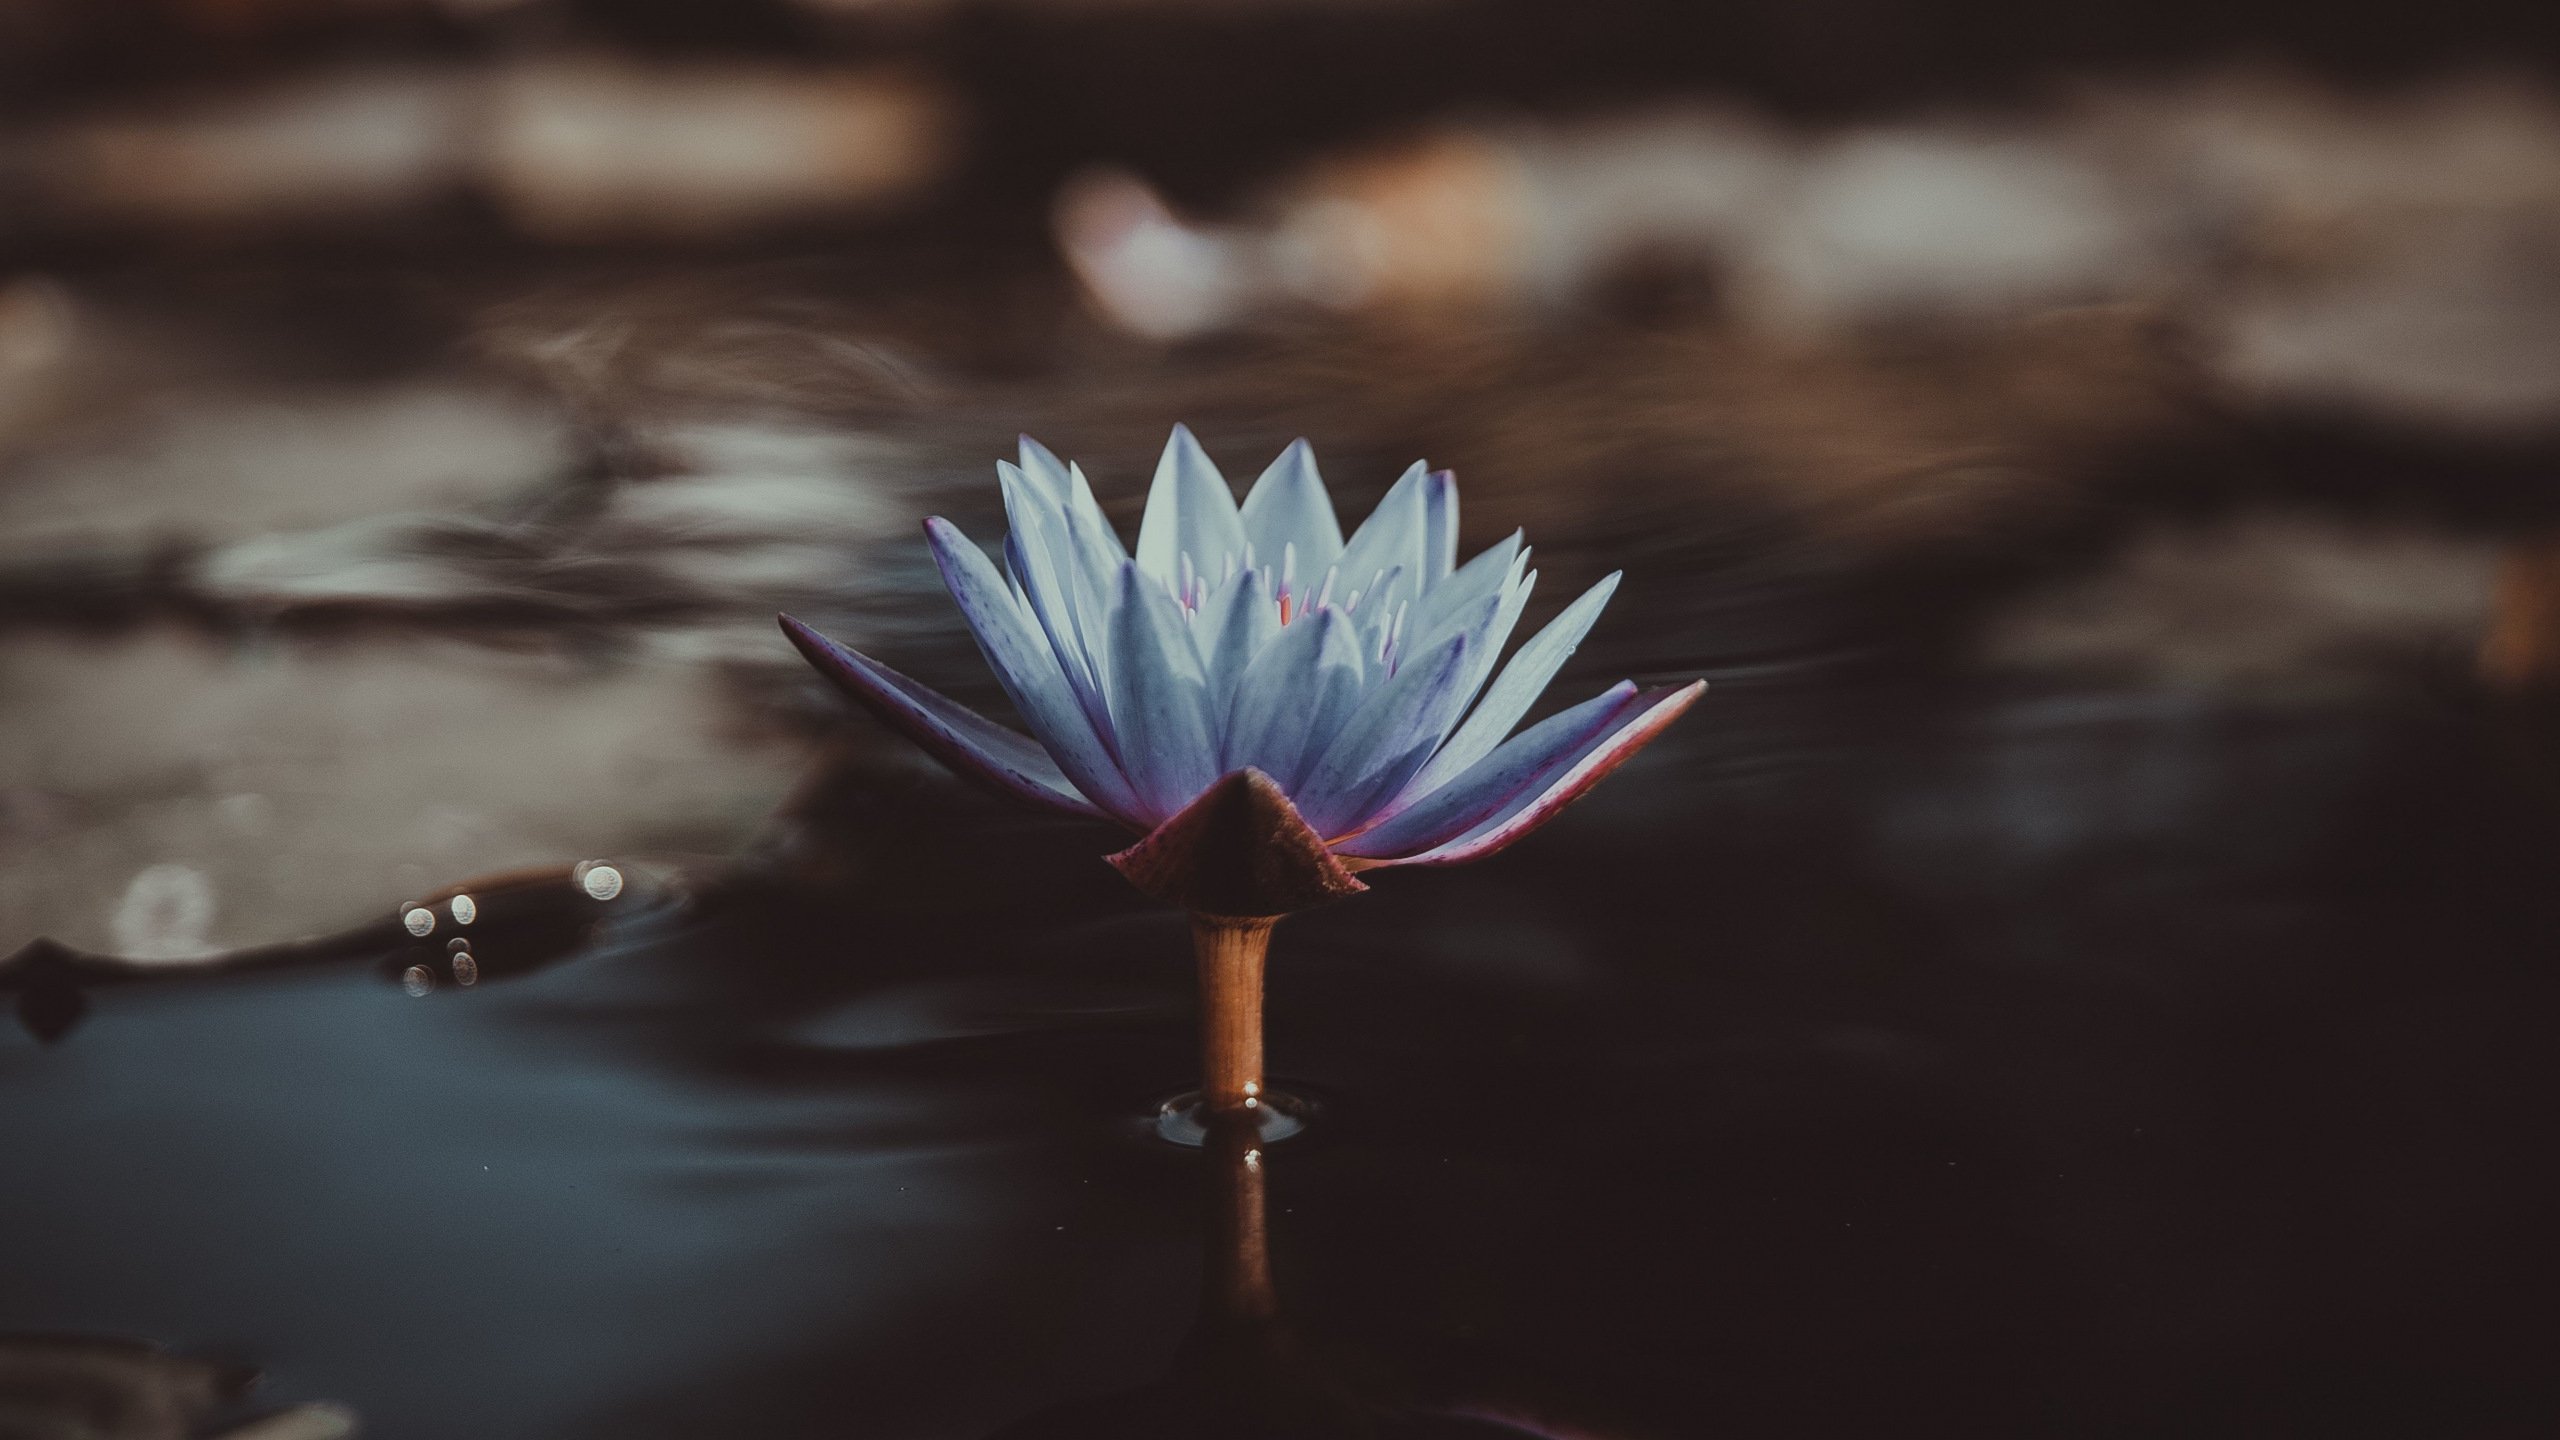 Blue Water Lily Wallpaper - Royal Commission Messages For Australia - HD Wallpaper 